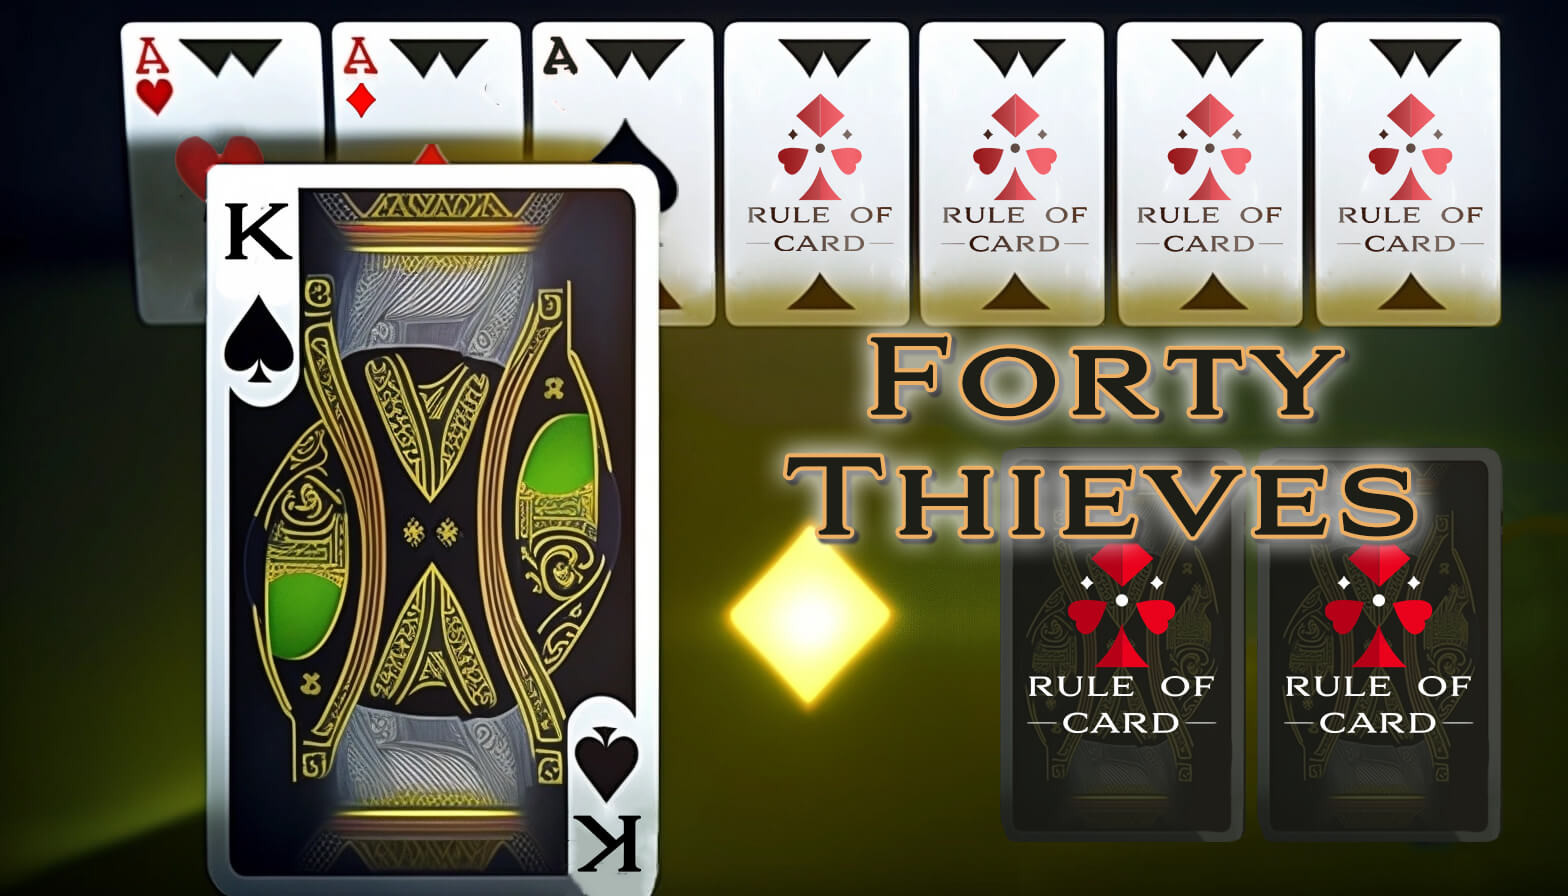 Playing the card game Forty Thieves